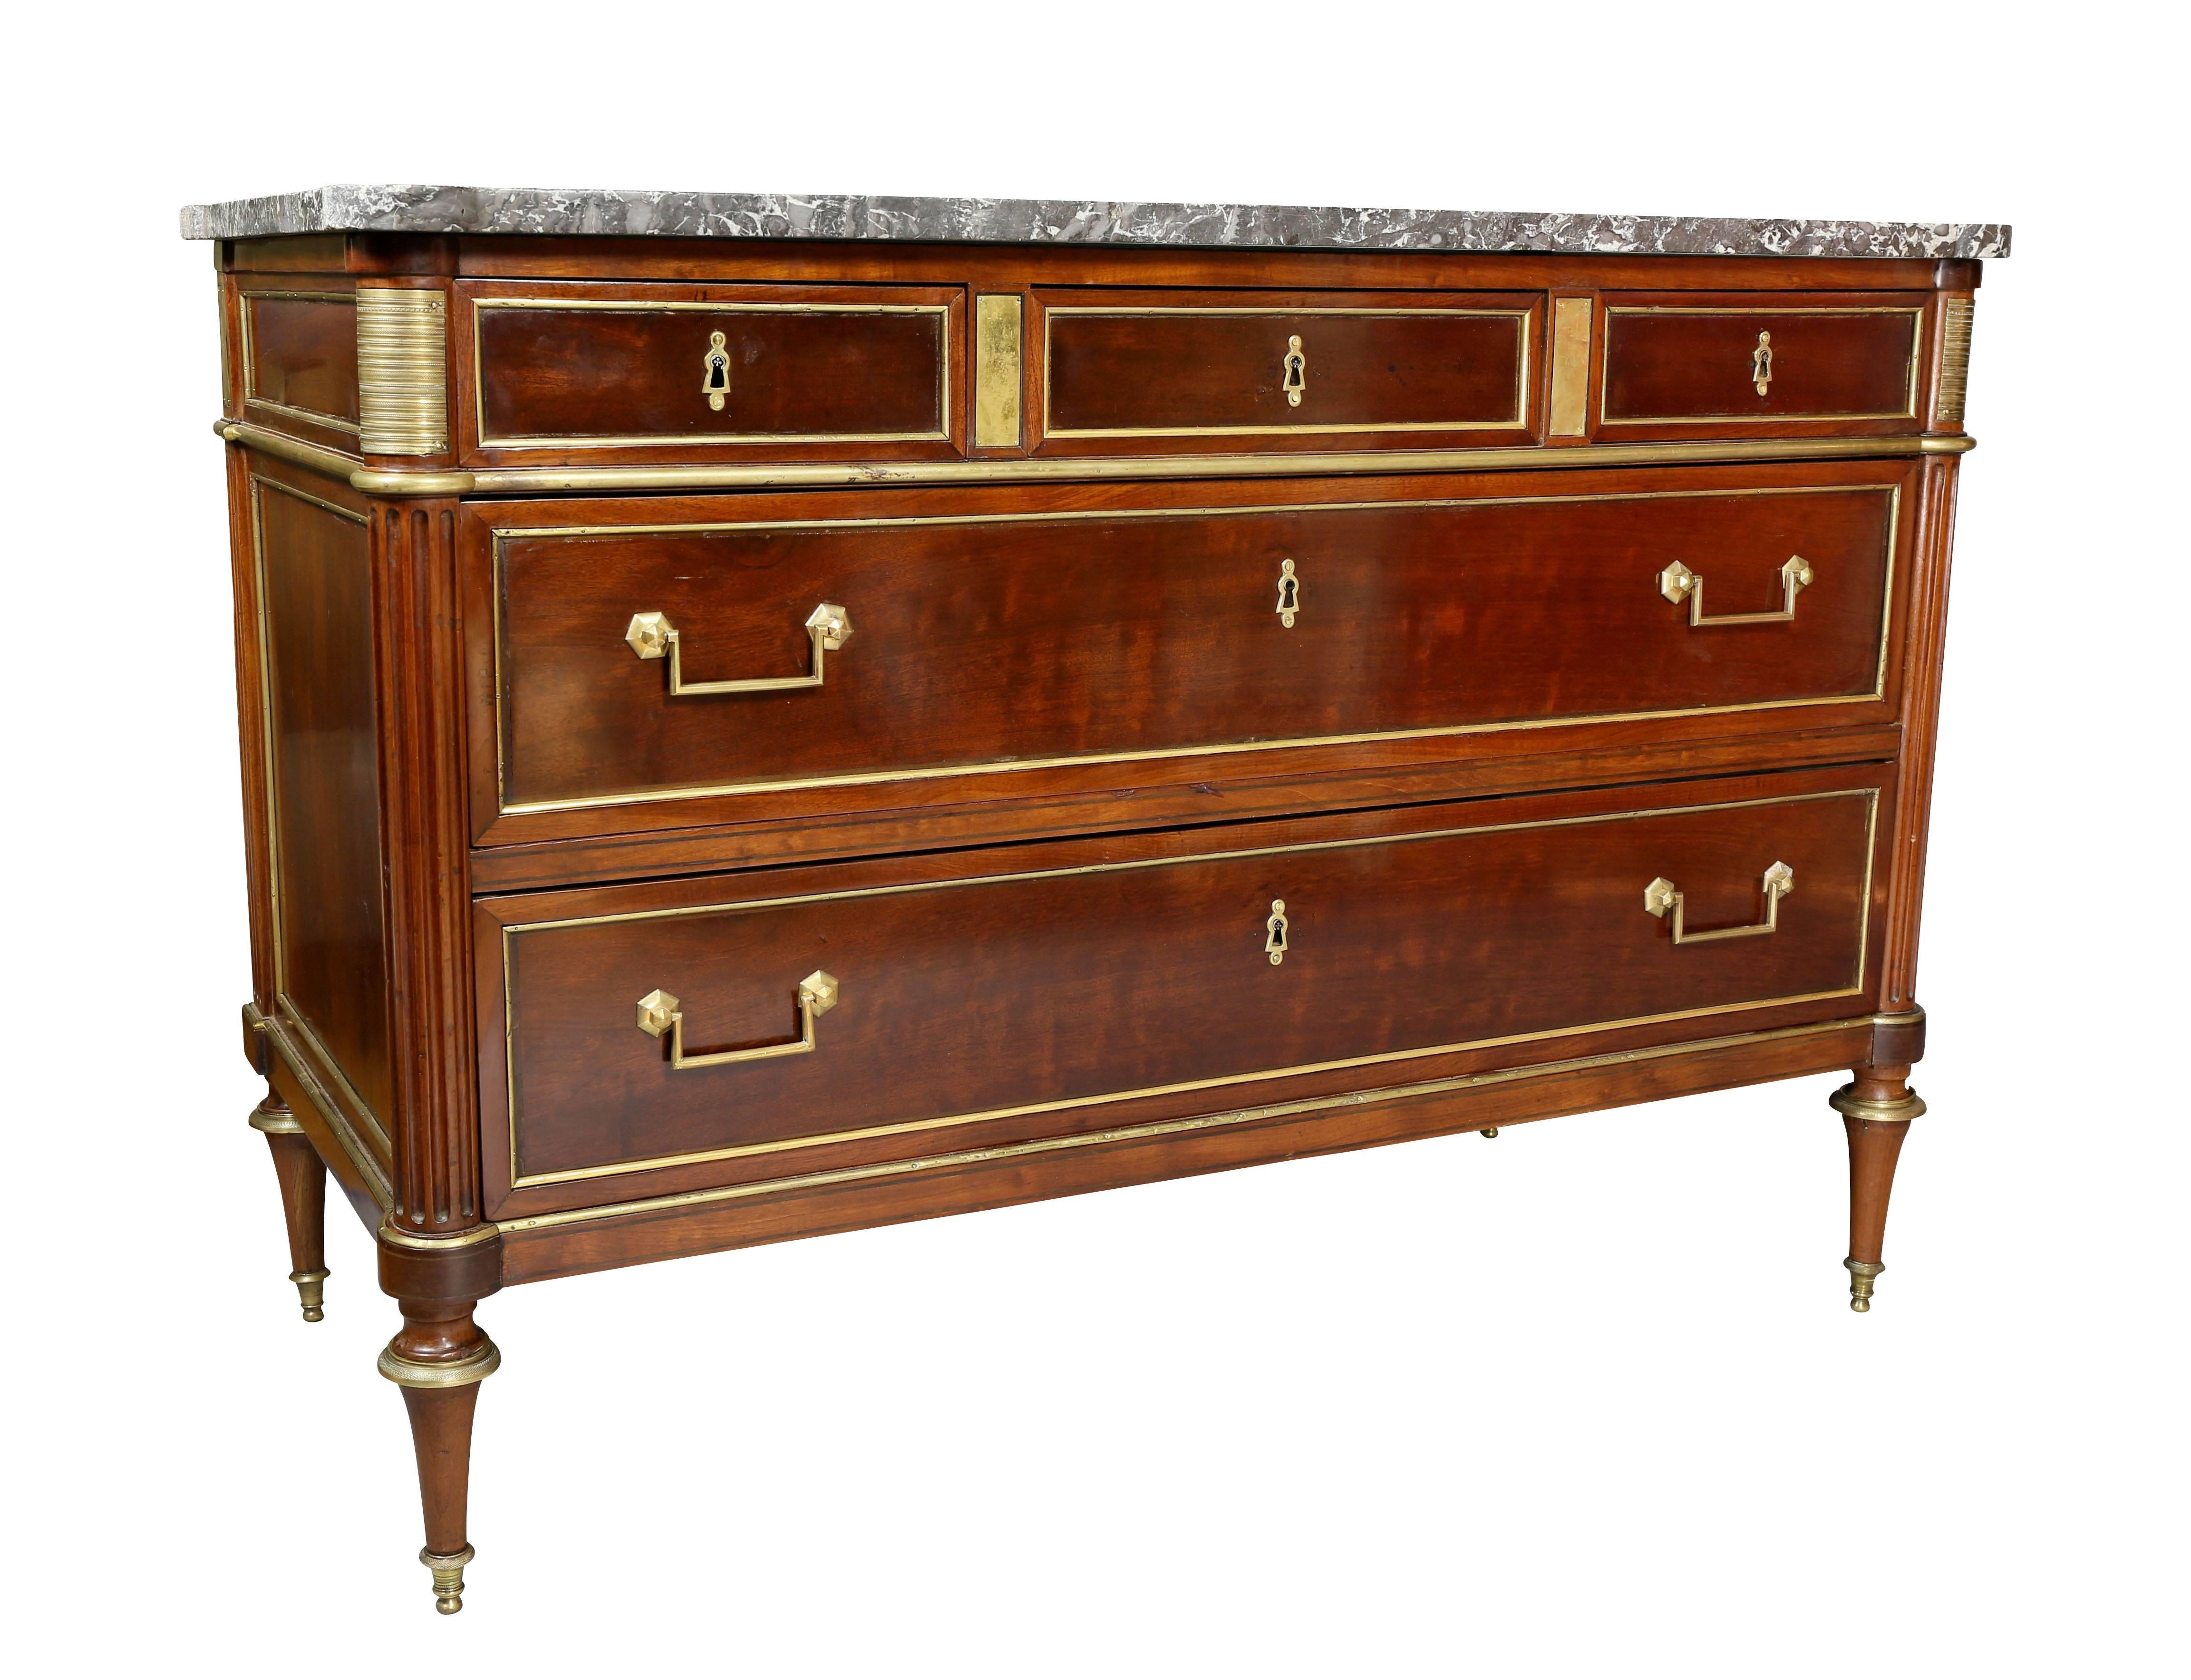 With rectangular grey and white marble top with rounded front corners over a conforming case with three drawers over two long drawers flanked by fluted columns raised on toupie feet. Stamped on top E. Mariage.